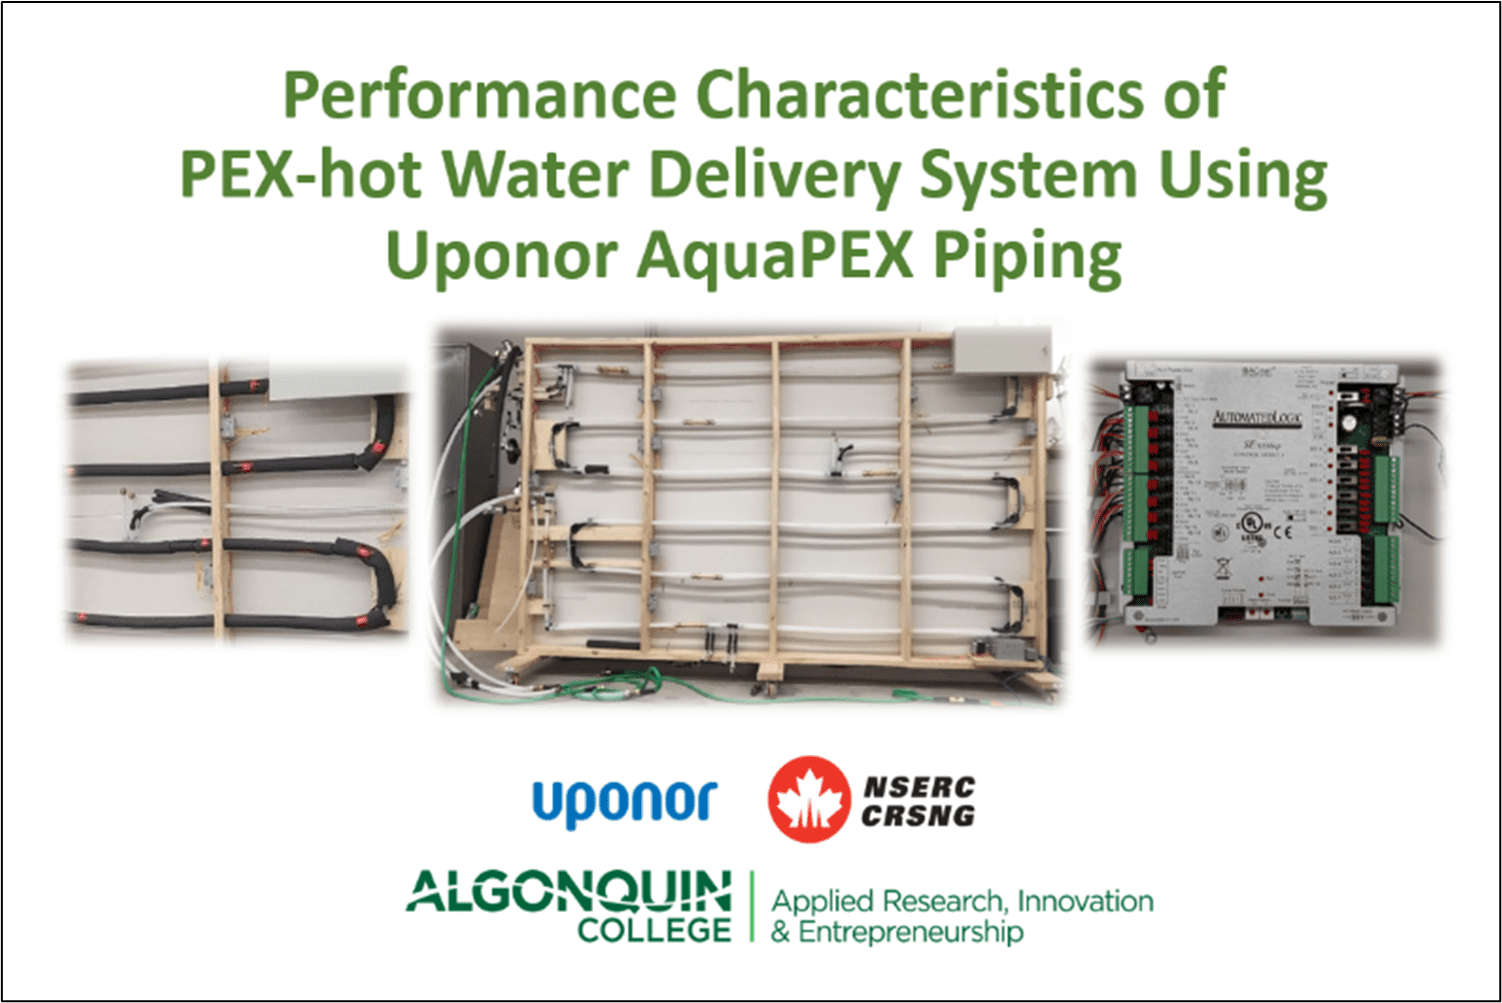 Performance Characteristics of PEX-hot Water Delivery System Using Uponor AquaPEX Piping